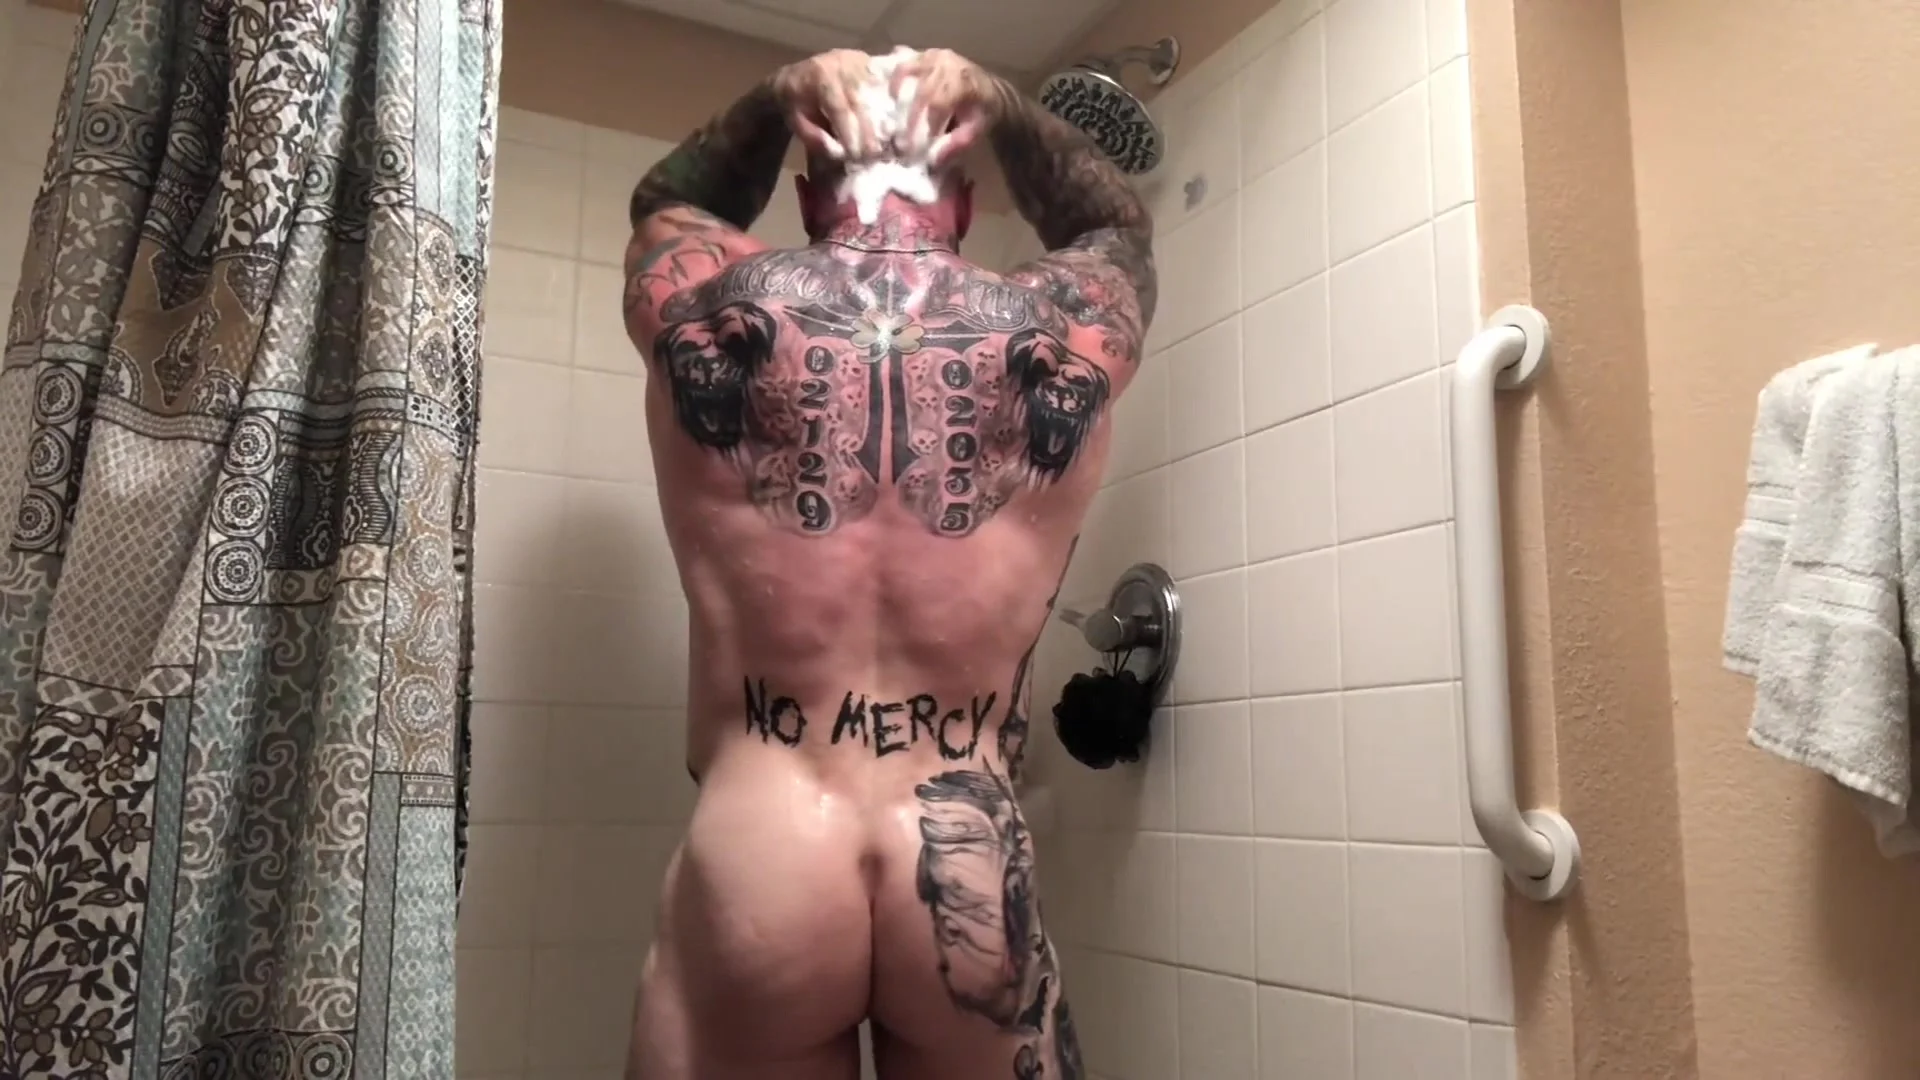 Tattooed Shower Porn - Beefy tattooed muscle bodybuilder takes a shower and cum - ThisVid.com